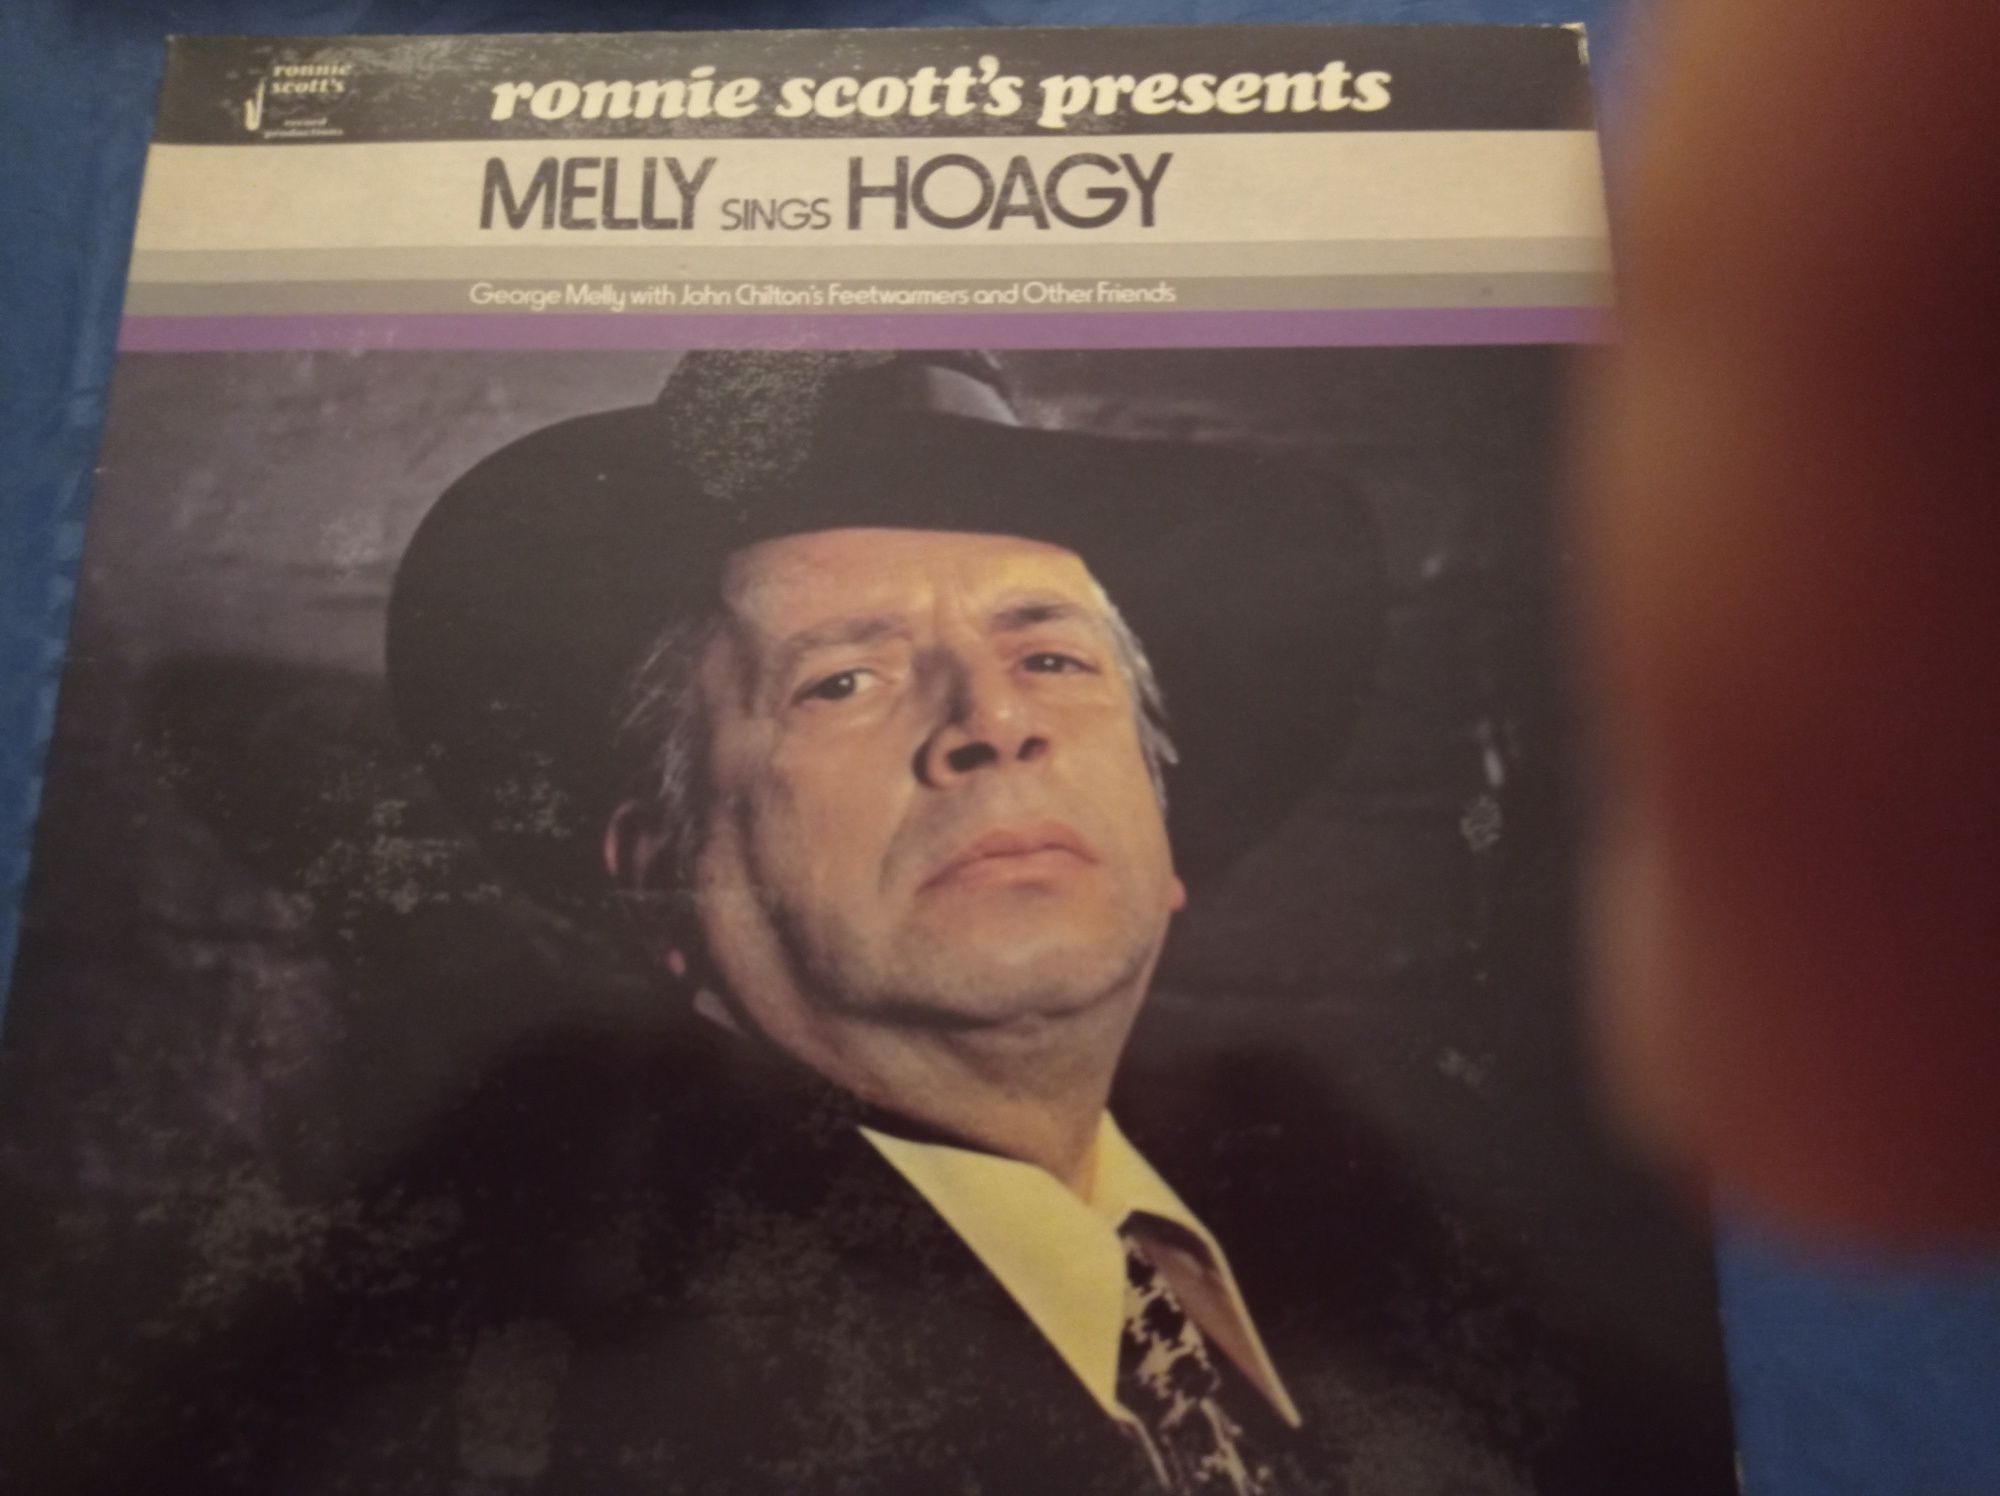 George Melly - Melly sings Melly